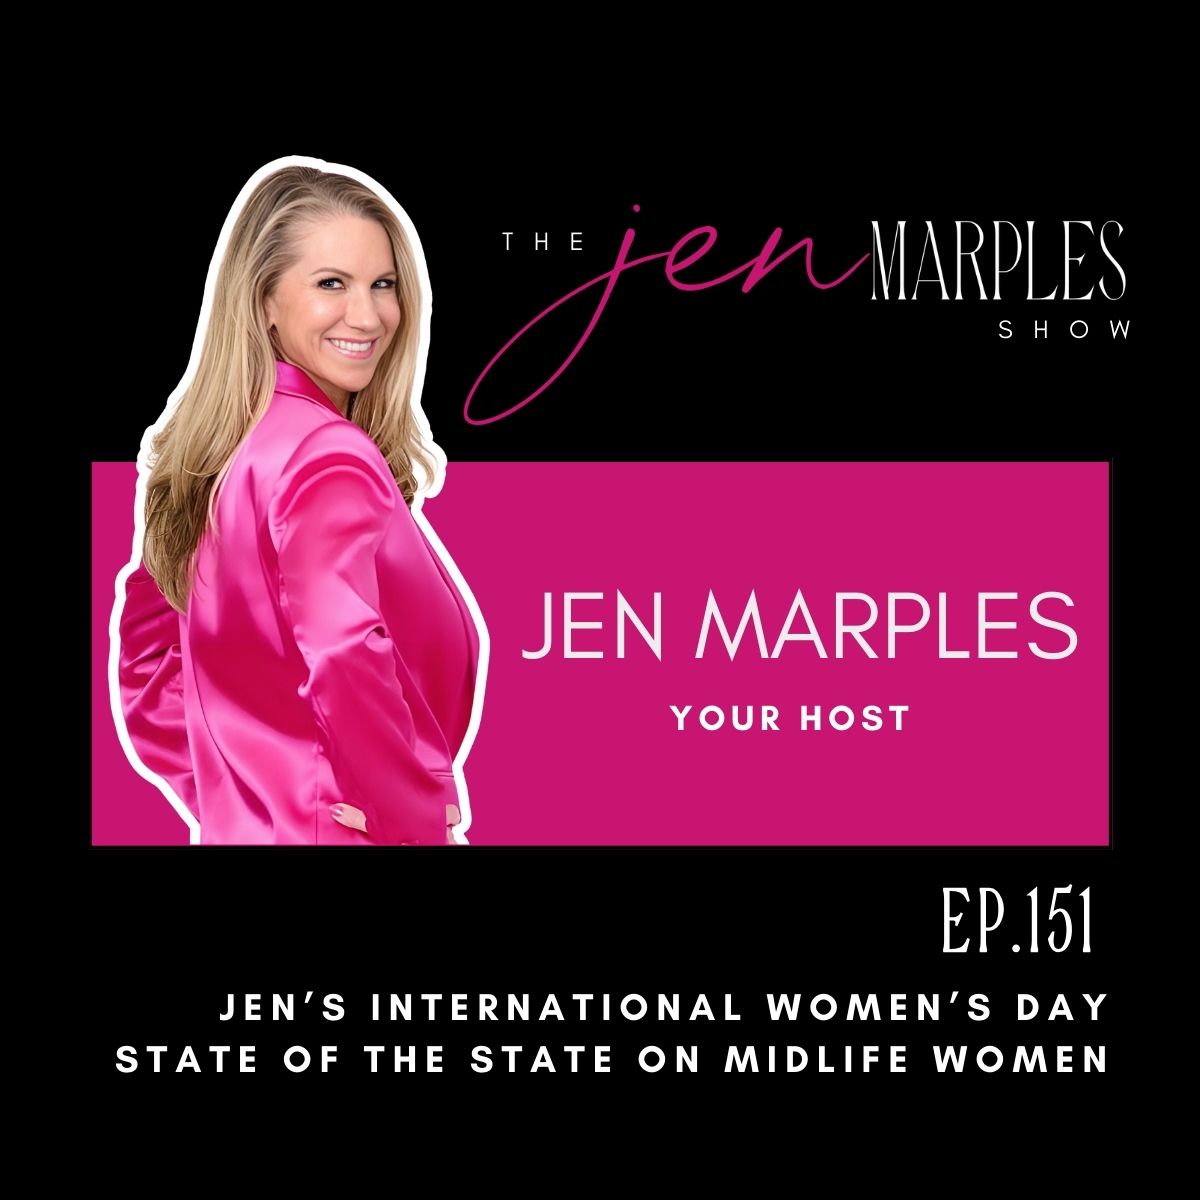 Jen's International Women's Day State of the State on Midlife Women